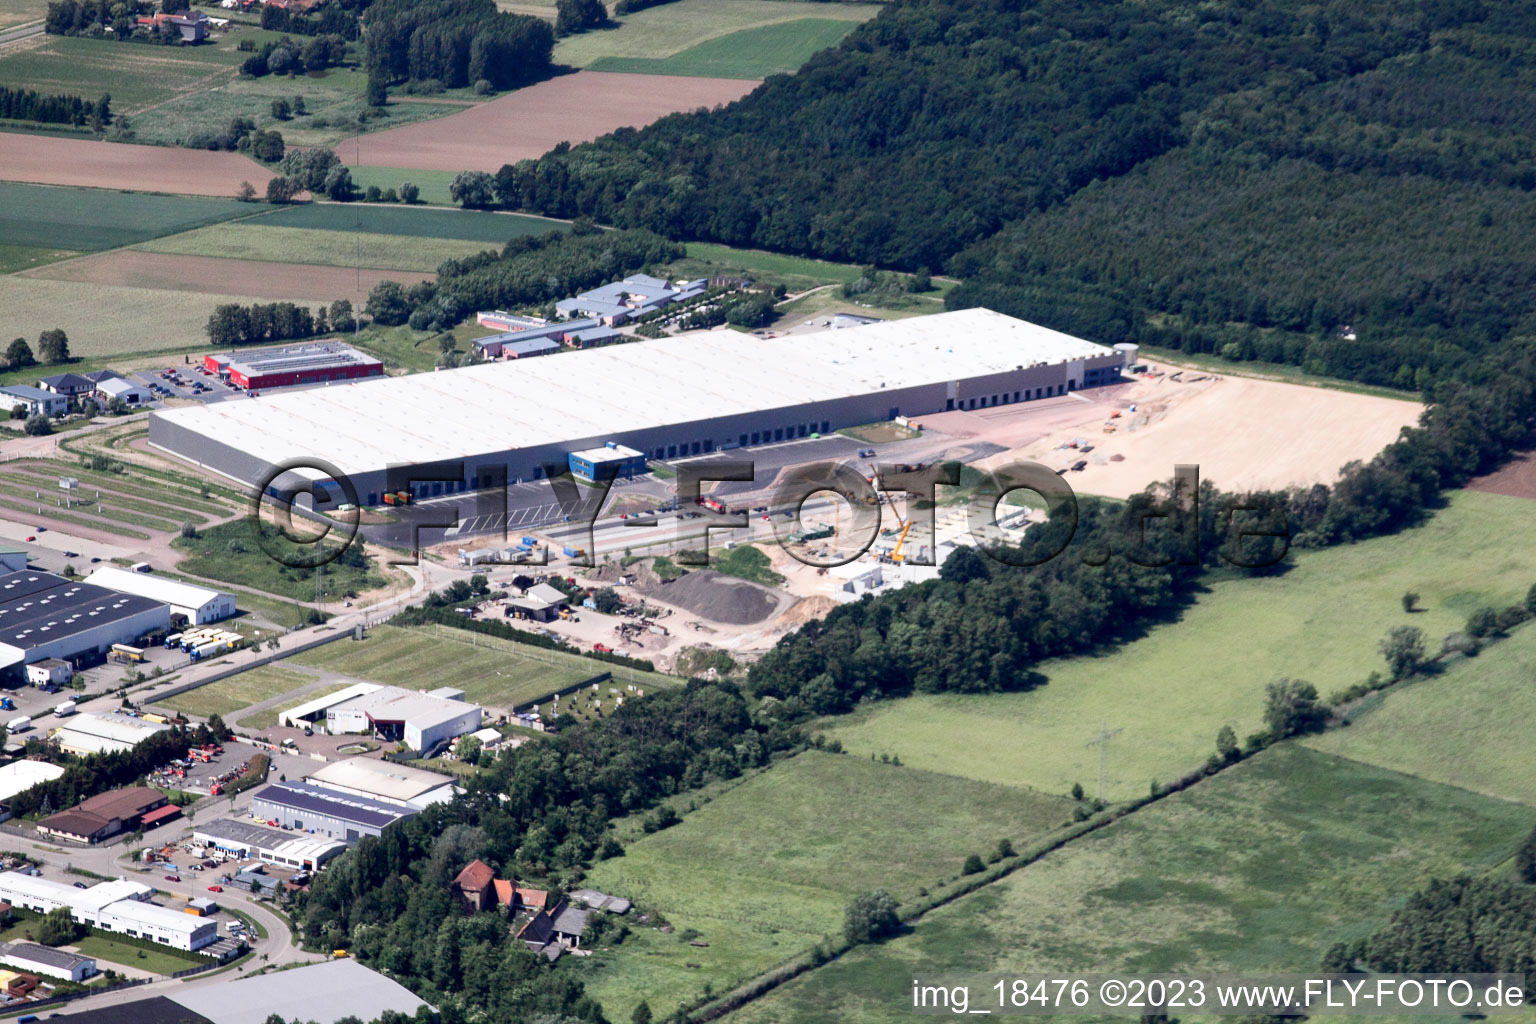 Coincidence logistics center in the district Minderslachen in Kandel in the state Rhineland-Palatinate, Germany from above